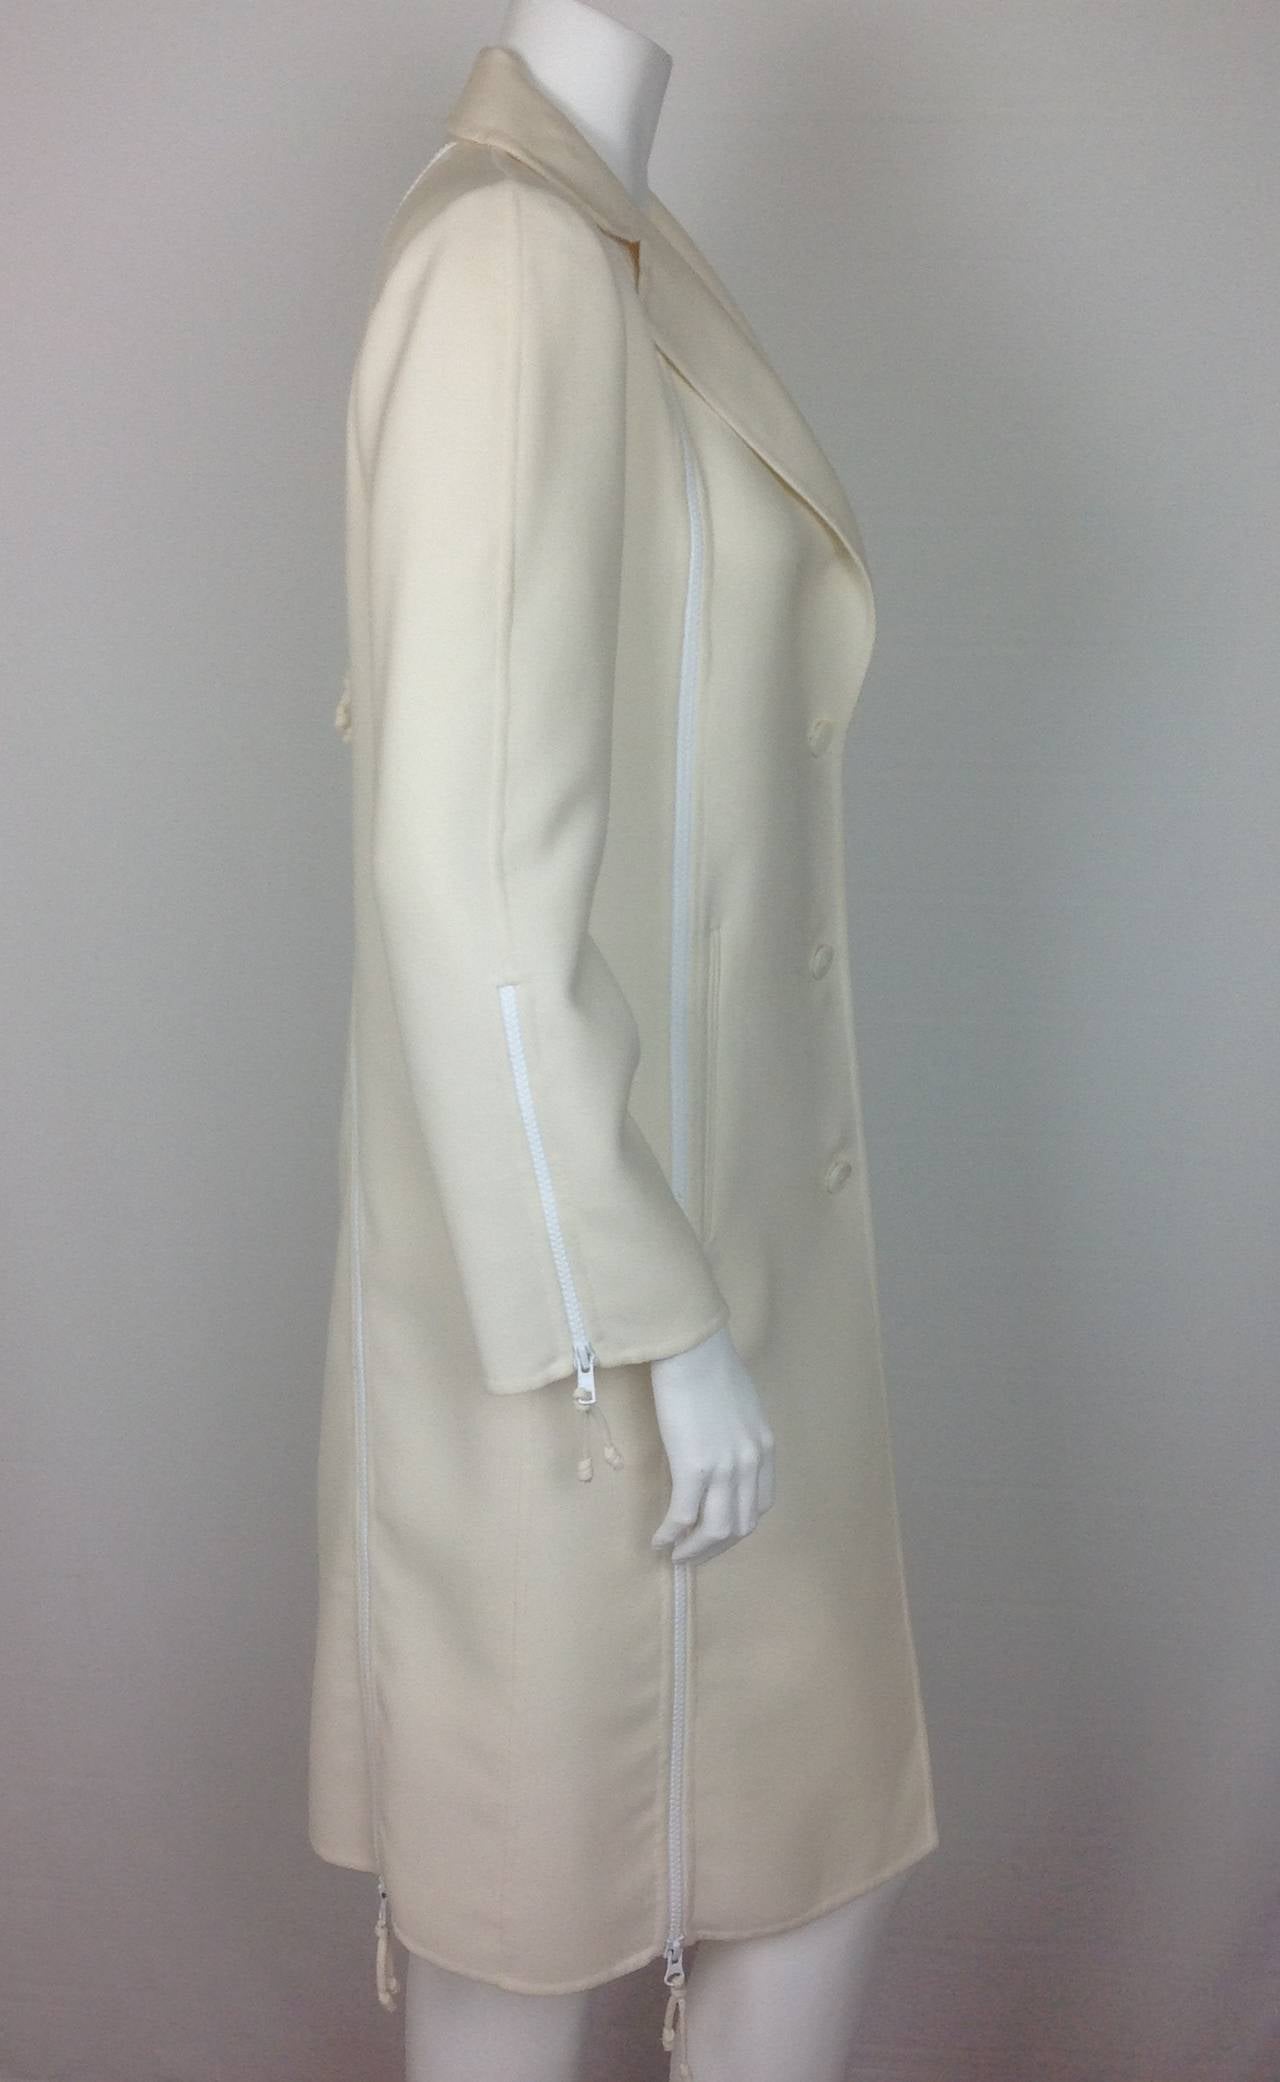 Cream lightweight wool 6 zipper coat by Chado Ralph Rucci.  
All the zippers work.  The full length zippers on the front and back of the coat, work in both directions. The zippers are white nylon, and smooth.
Single breasted 3 button closure.